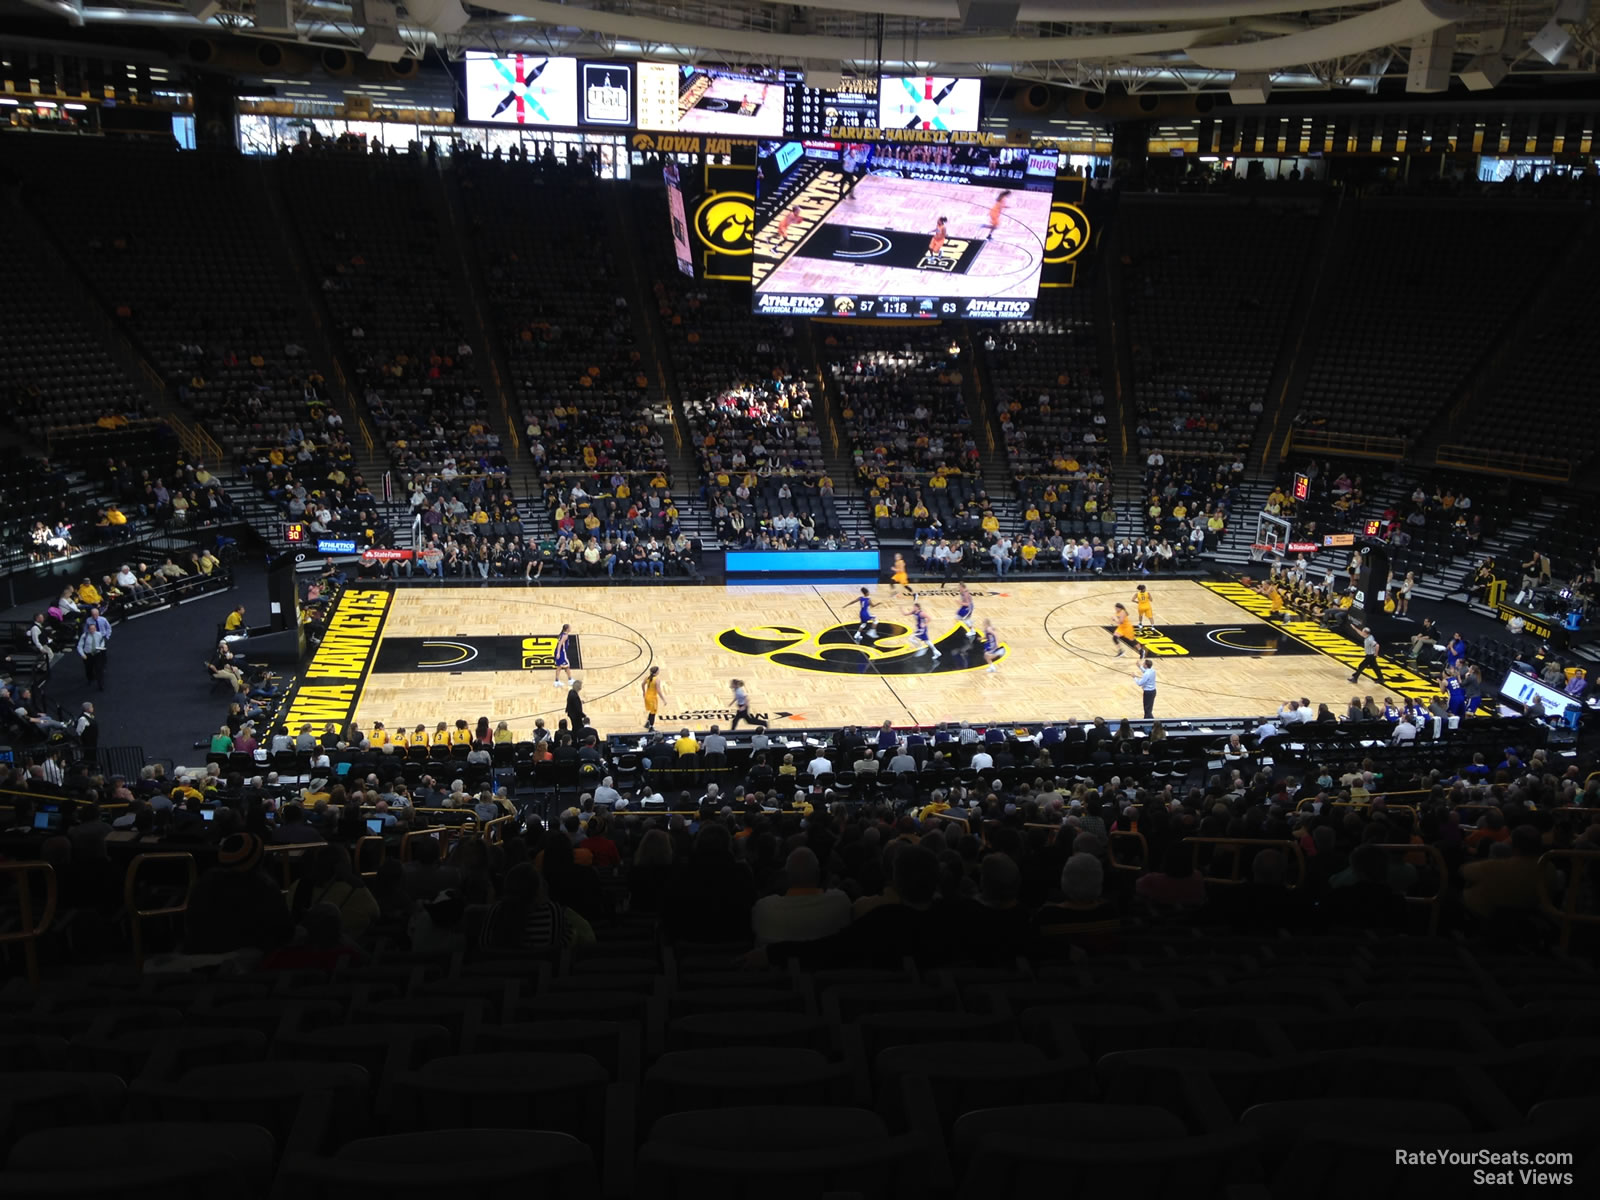 section aa, row 36 seat view  - carver-hawkeye arena